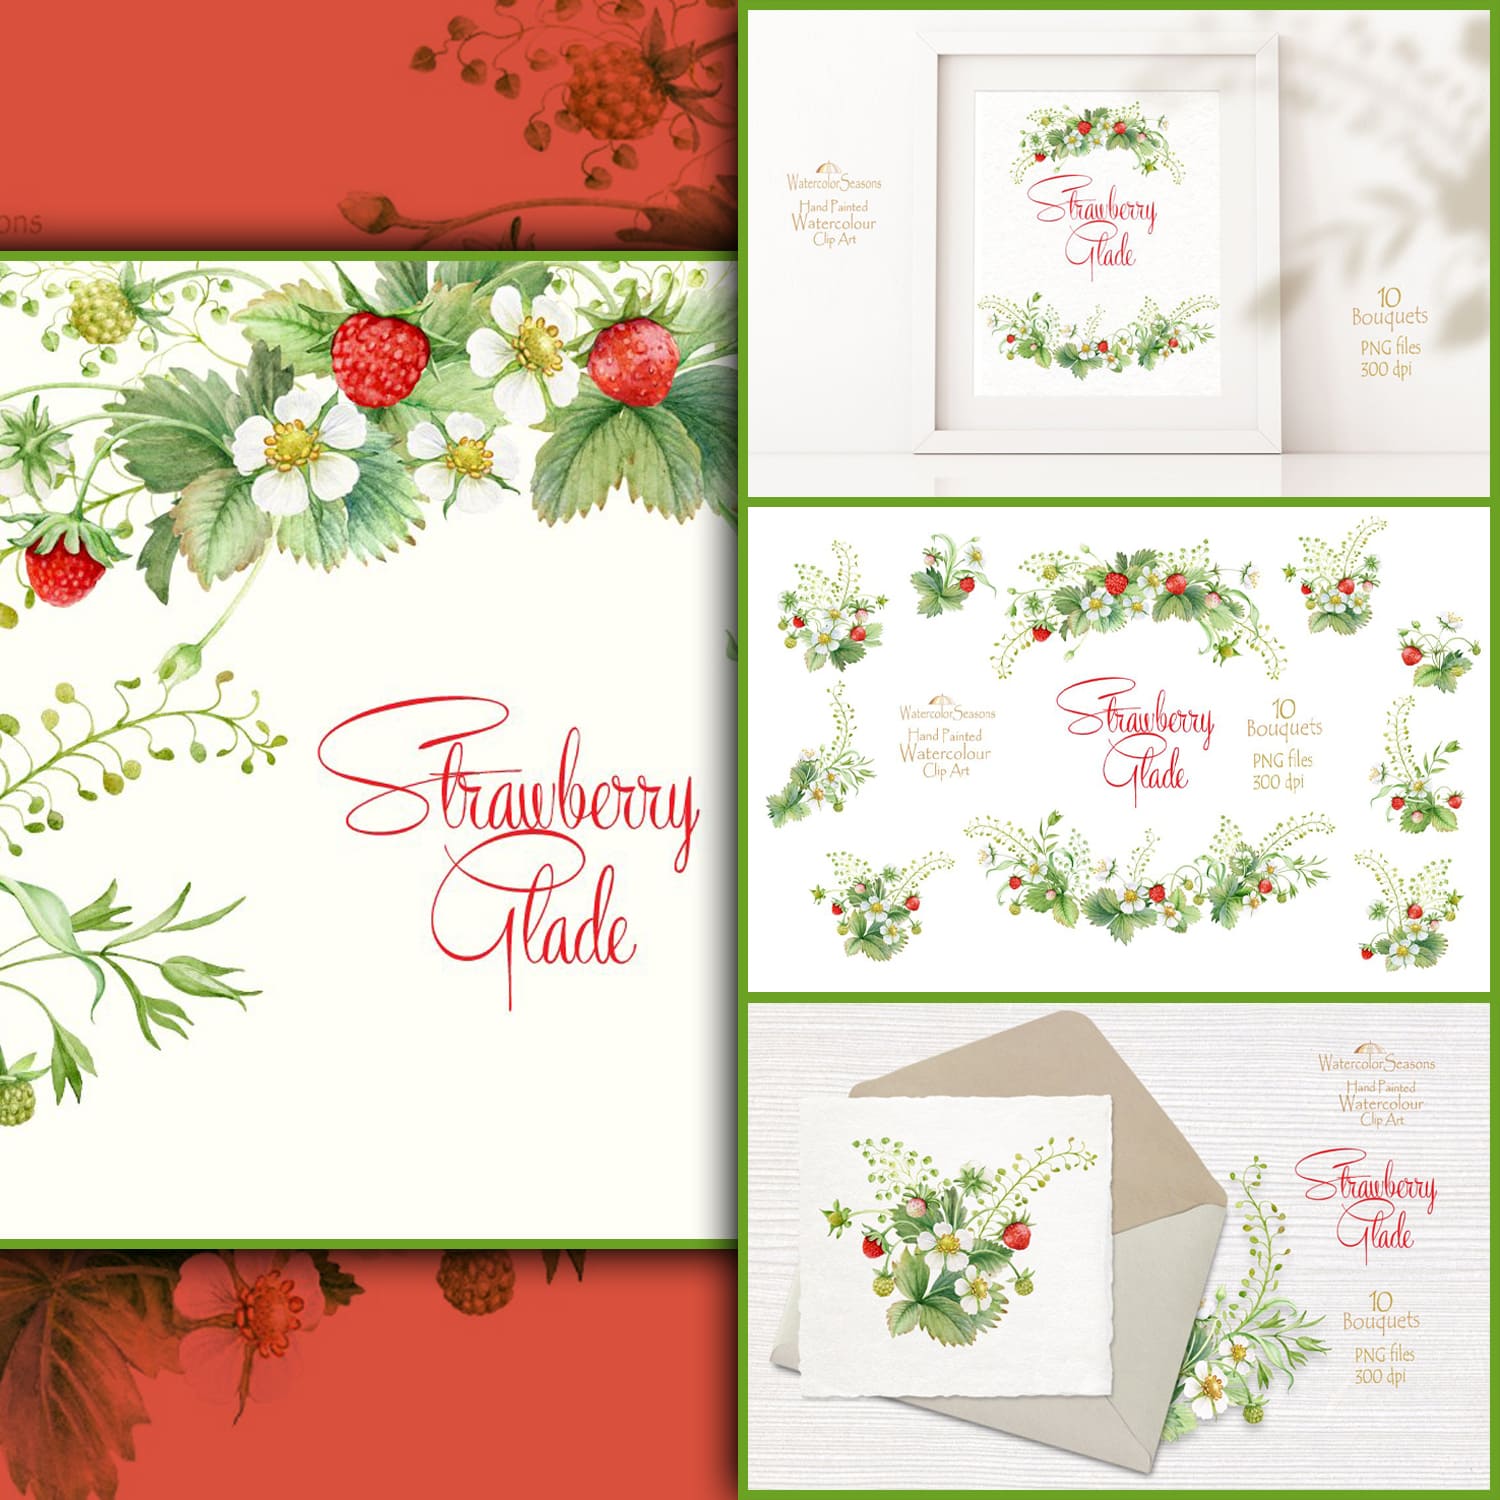 Four slides with the image of wild strawberry bouquets.